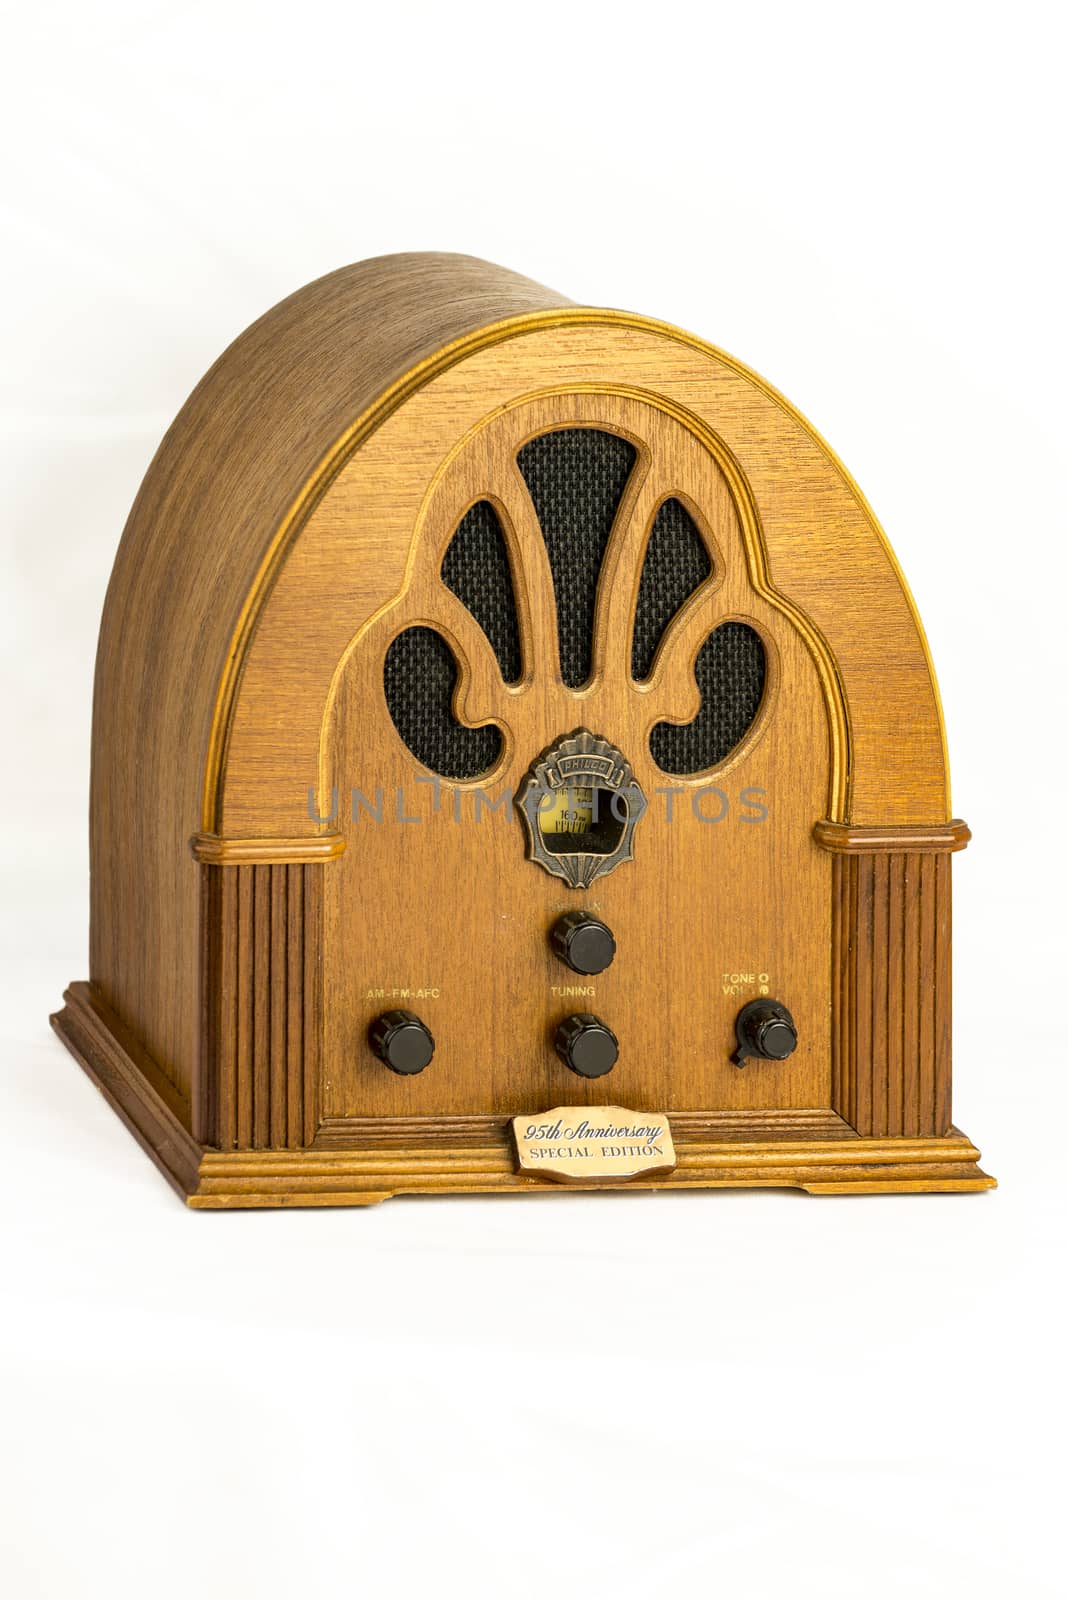 Vintage radio device over a white background